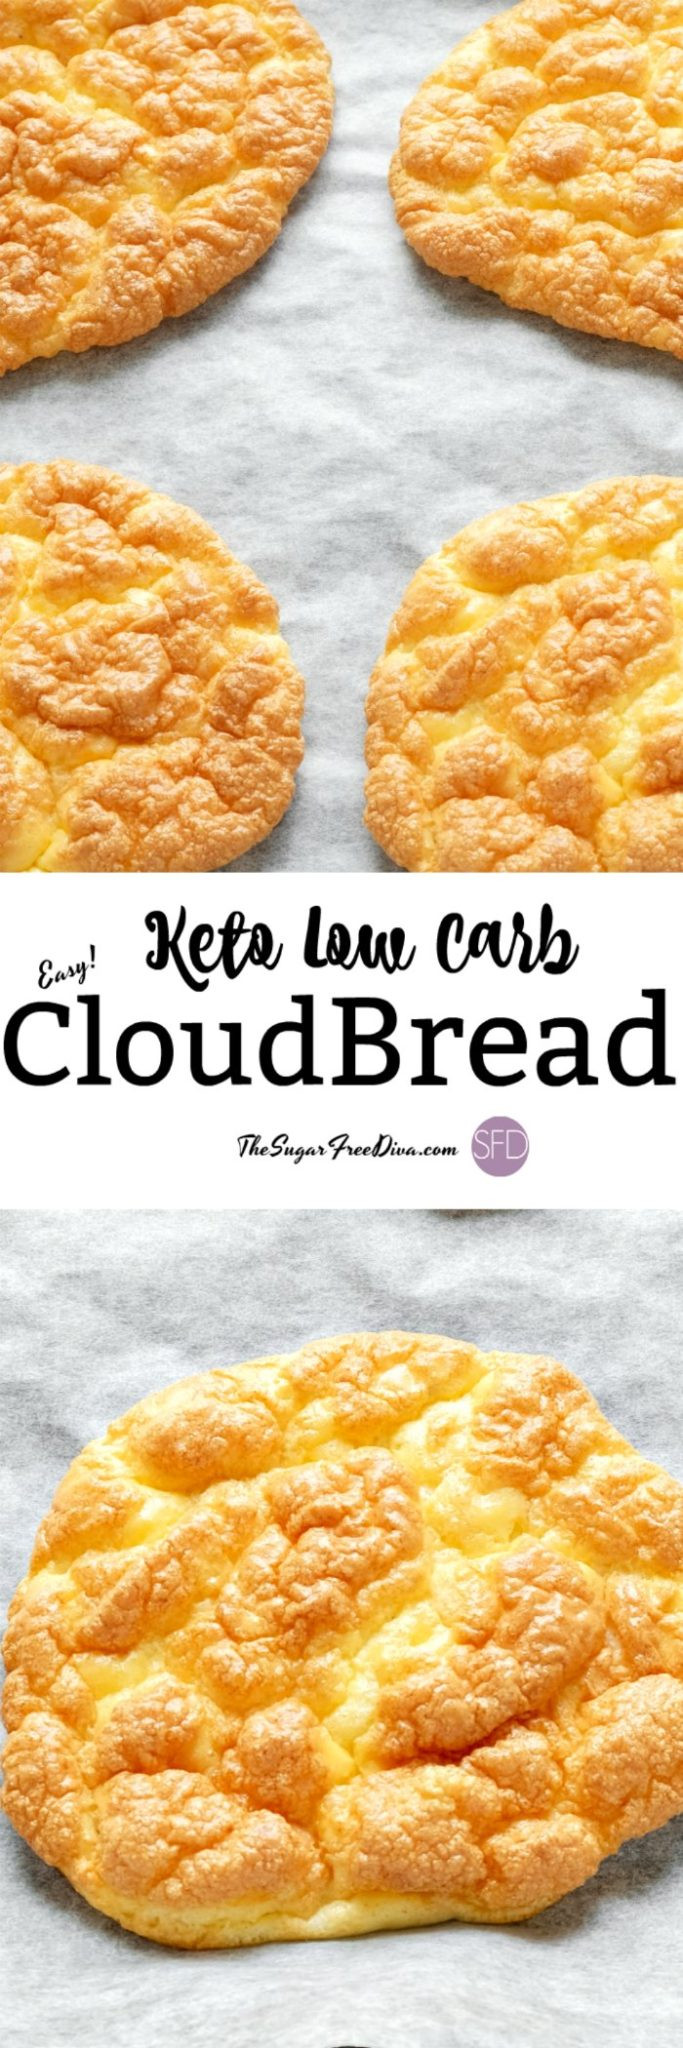 Keto Cloud Bread Recipe Video Check out this recipe for Sugar Free and Keto Cloud Bread